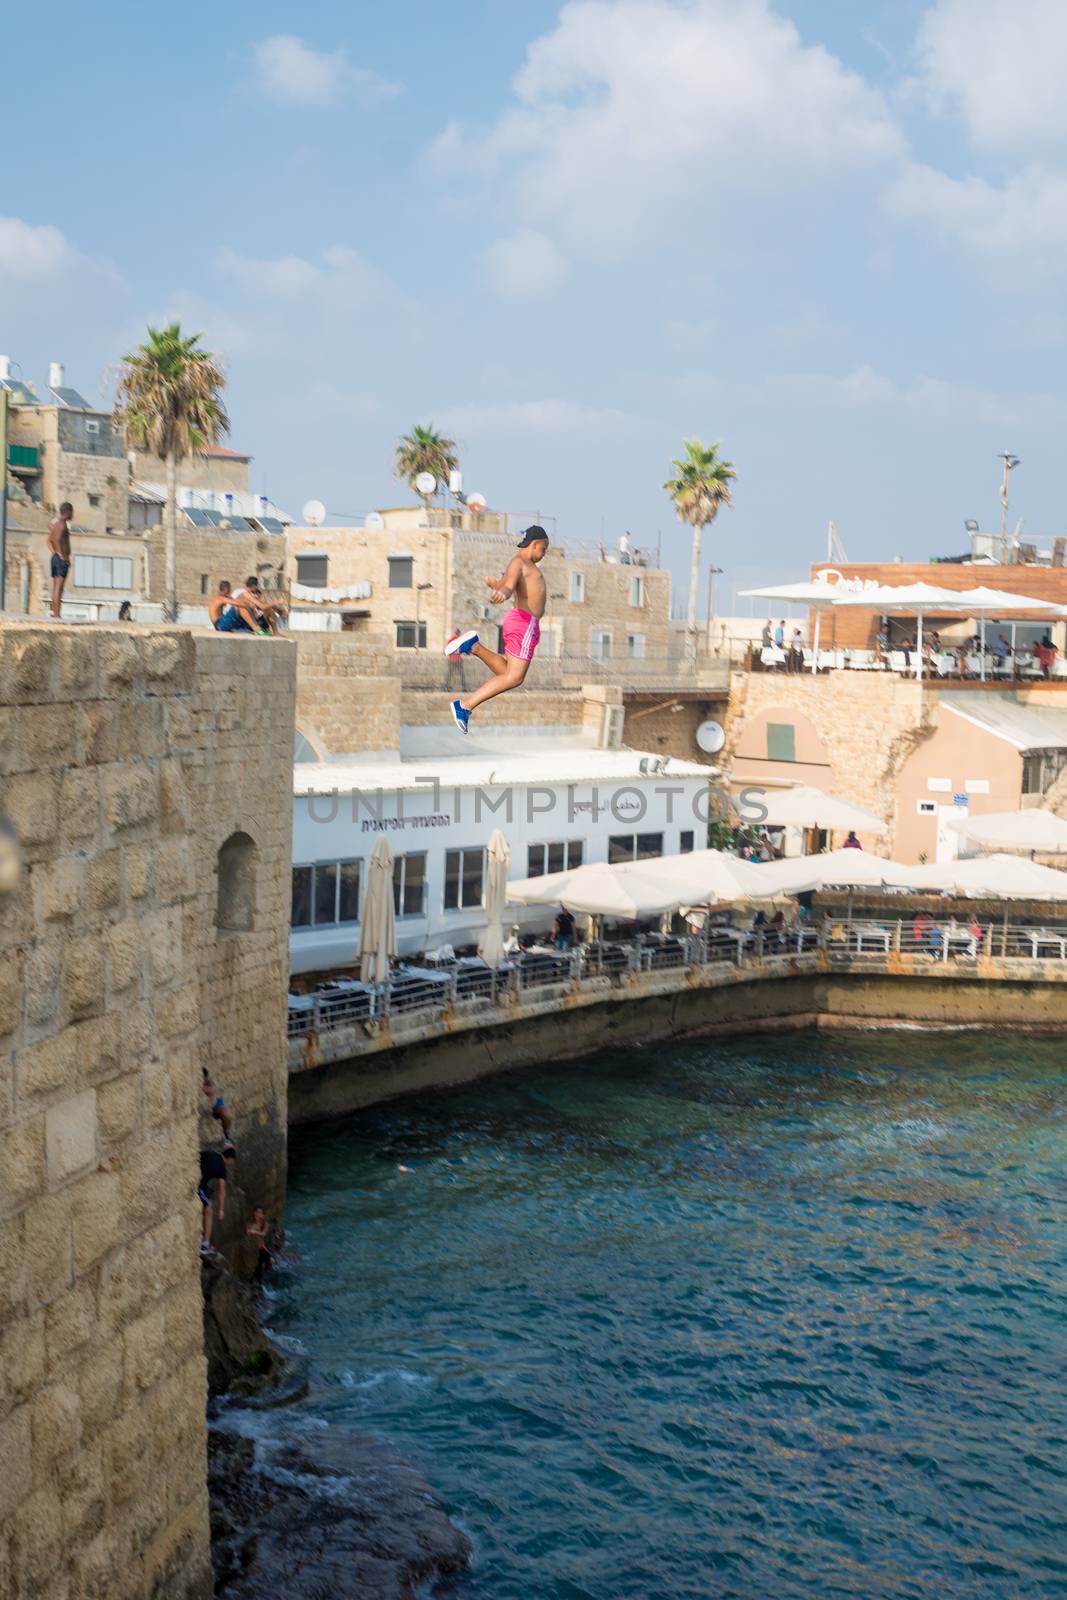 ACRE, ISRAEL - AUGUST 03, 2016: Young man jumps to the sea from the top of the ancient walls of Acre, Israel. Acre is one of the oldest continuously inhabited sites in the world